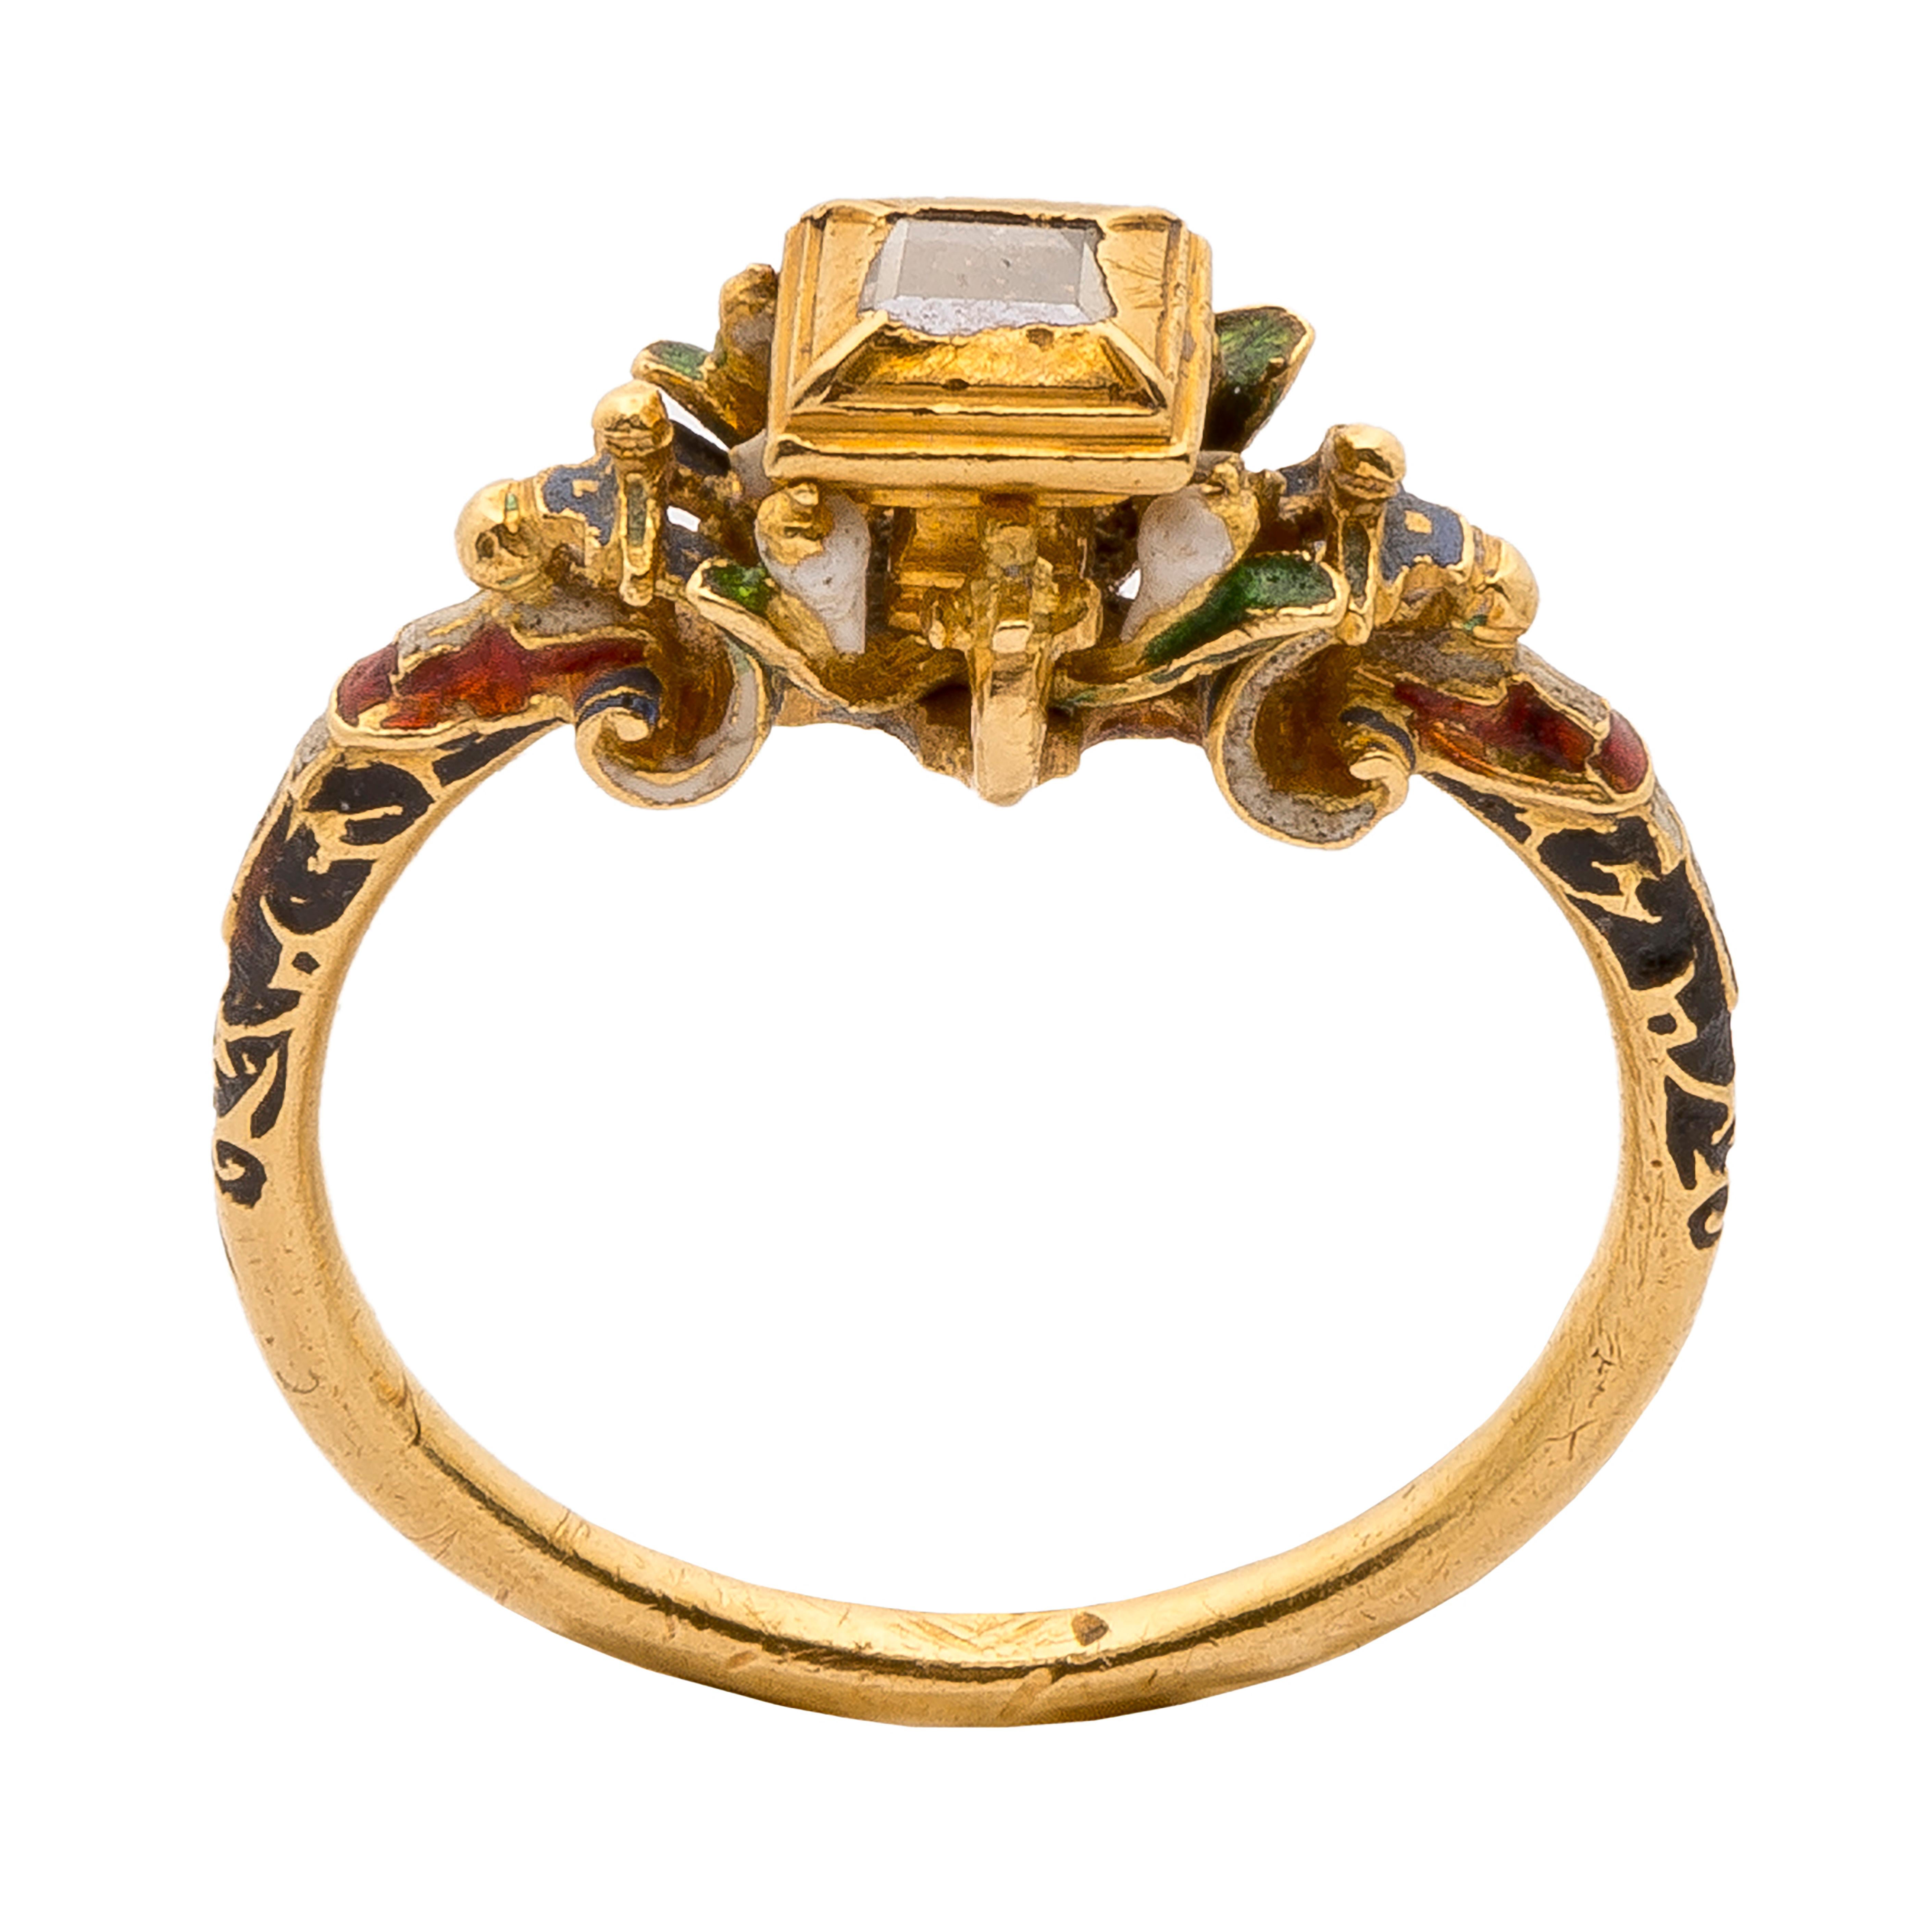 Renaissance Diamond Ring 
Western Europe, late 16th century 
Gold, diamond, enamel 
Weight 5.6 gr.; Circumference 54.51 mm.; US size 7, UK size O 

A gold ring with a hoop in rounded D-section and “blackwork” ornament on the shoulder in opaque black